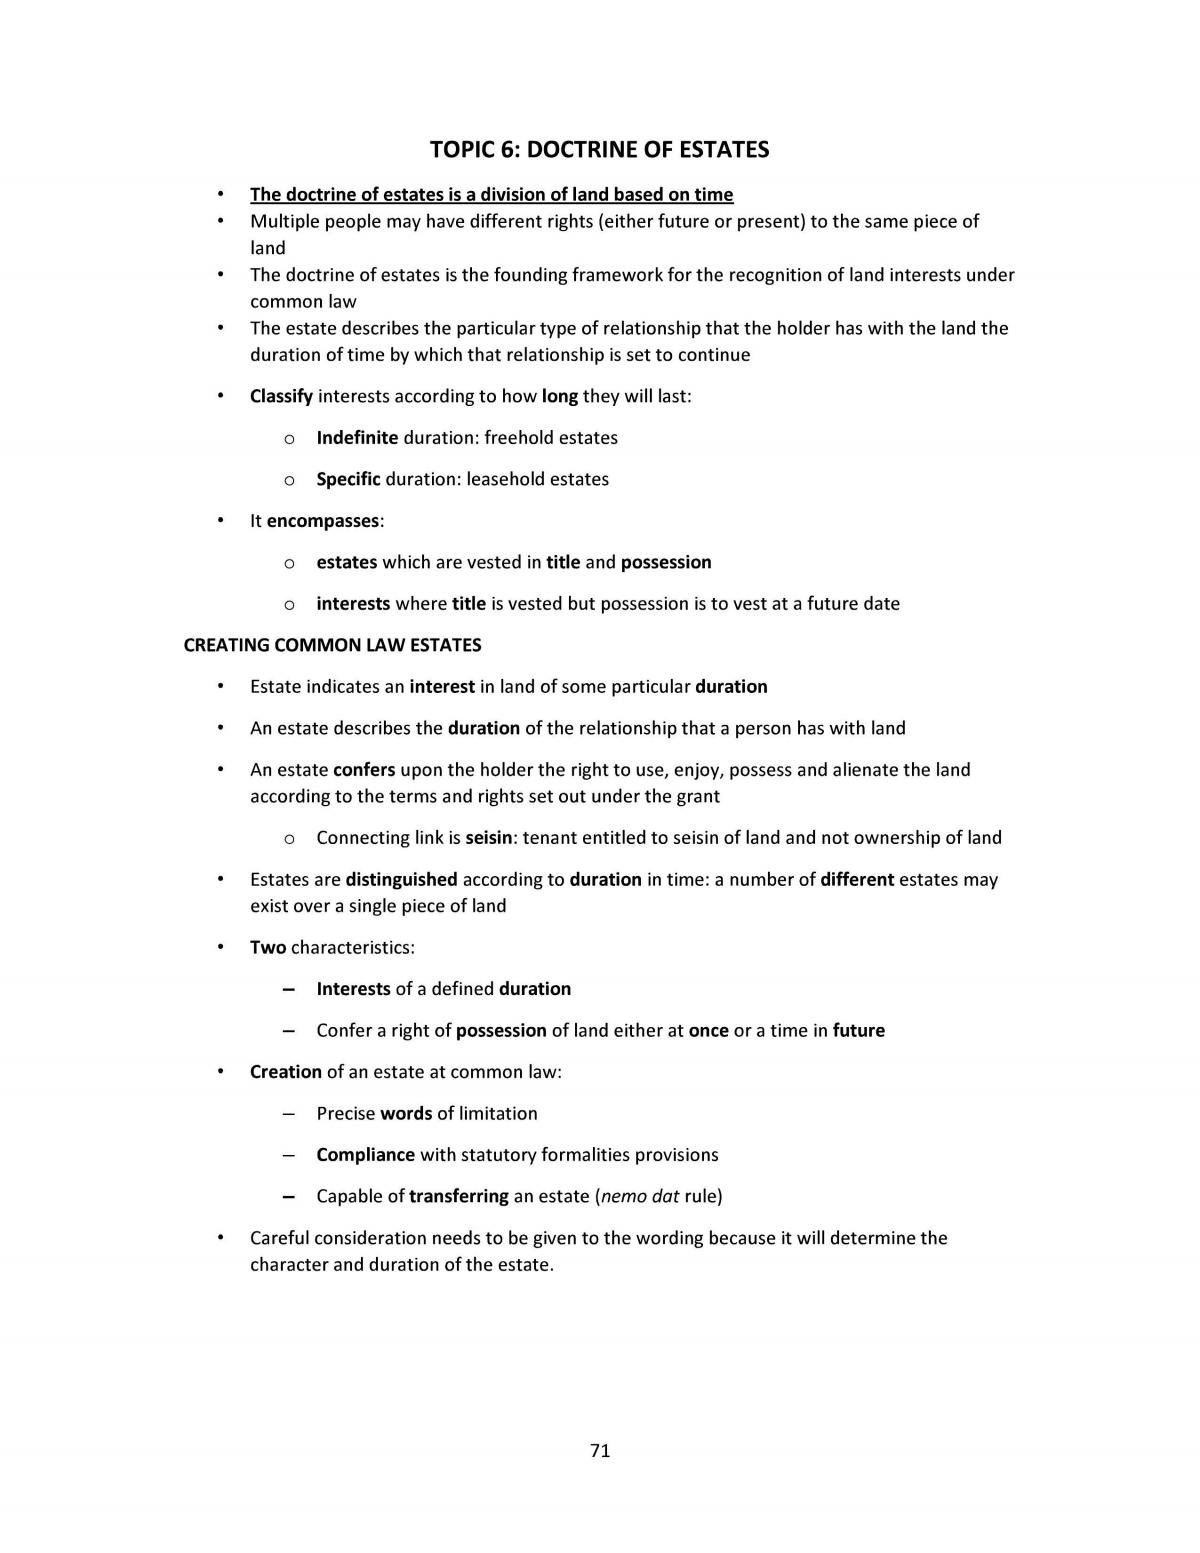 Topic 6 Study Notes Doctrine of Estates (MLL 405 Equity and Trusts) - Page 1